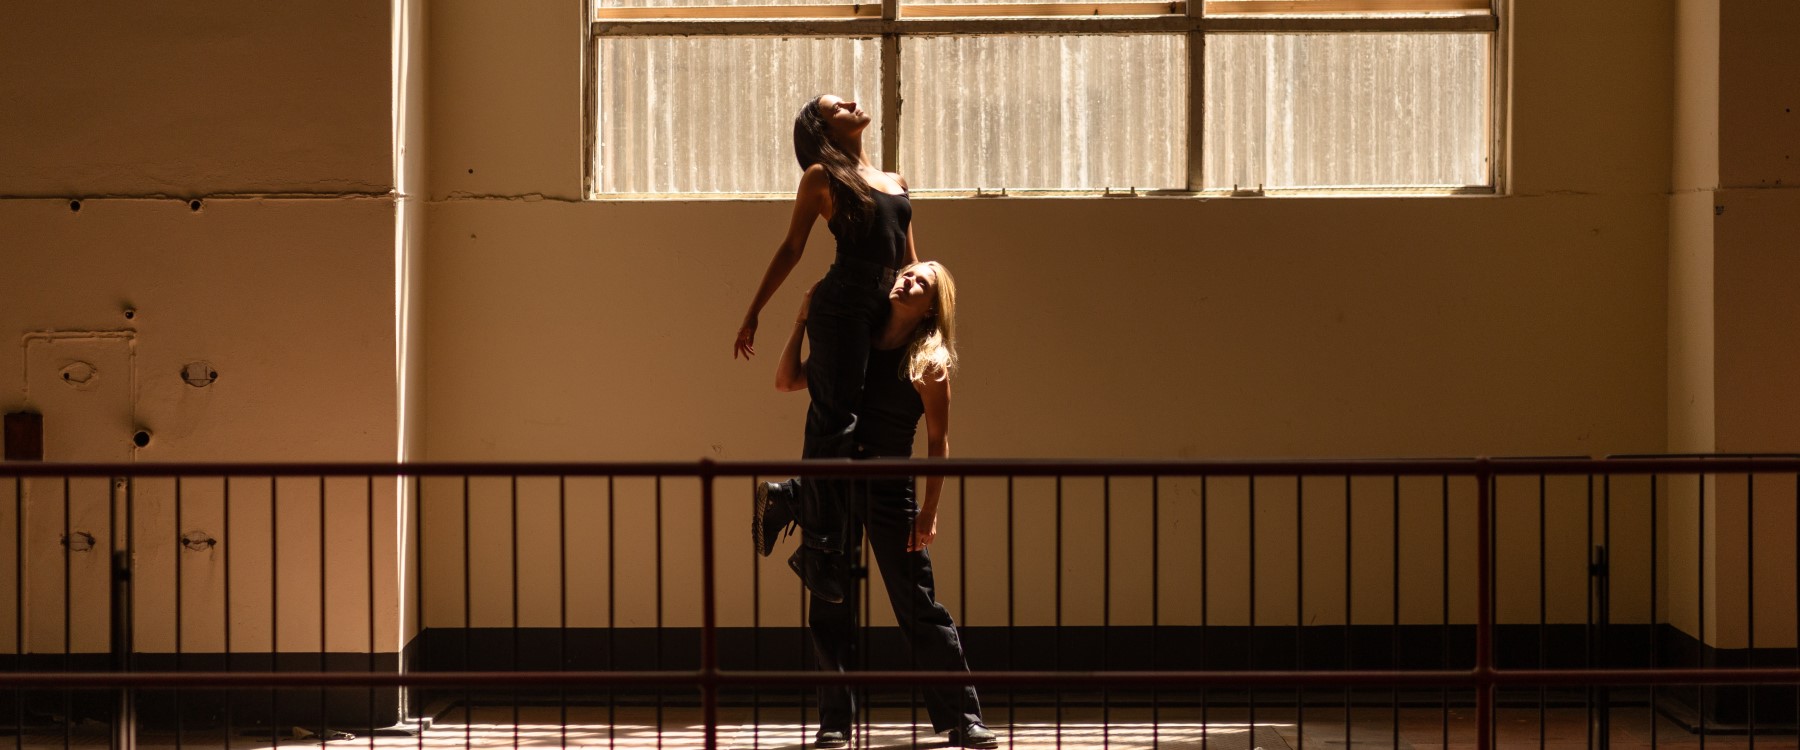 Two performers dressed in black, one lifting the other up towards a bright window, within a bright and warmly lit industrial space with a black balustrade in the foreground